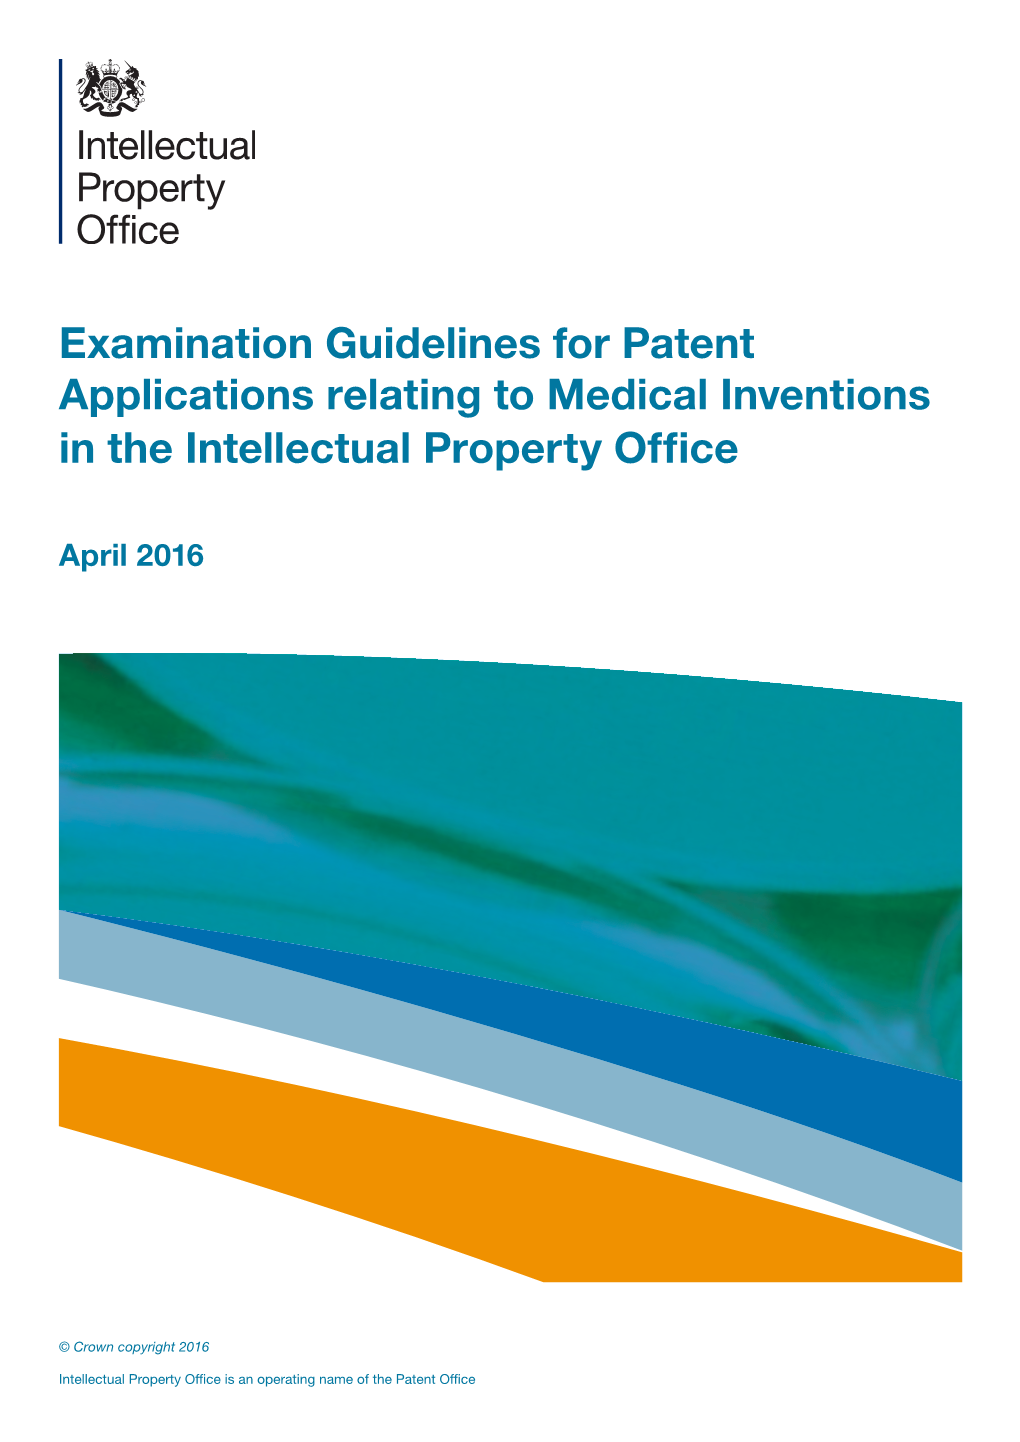 Examination Guidelines for Patent Applications Relating to Medical Inventions in the Intellectual Property Office